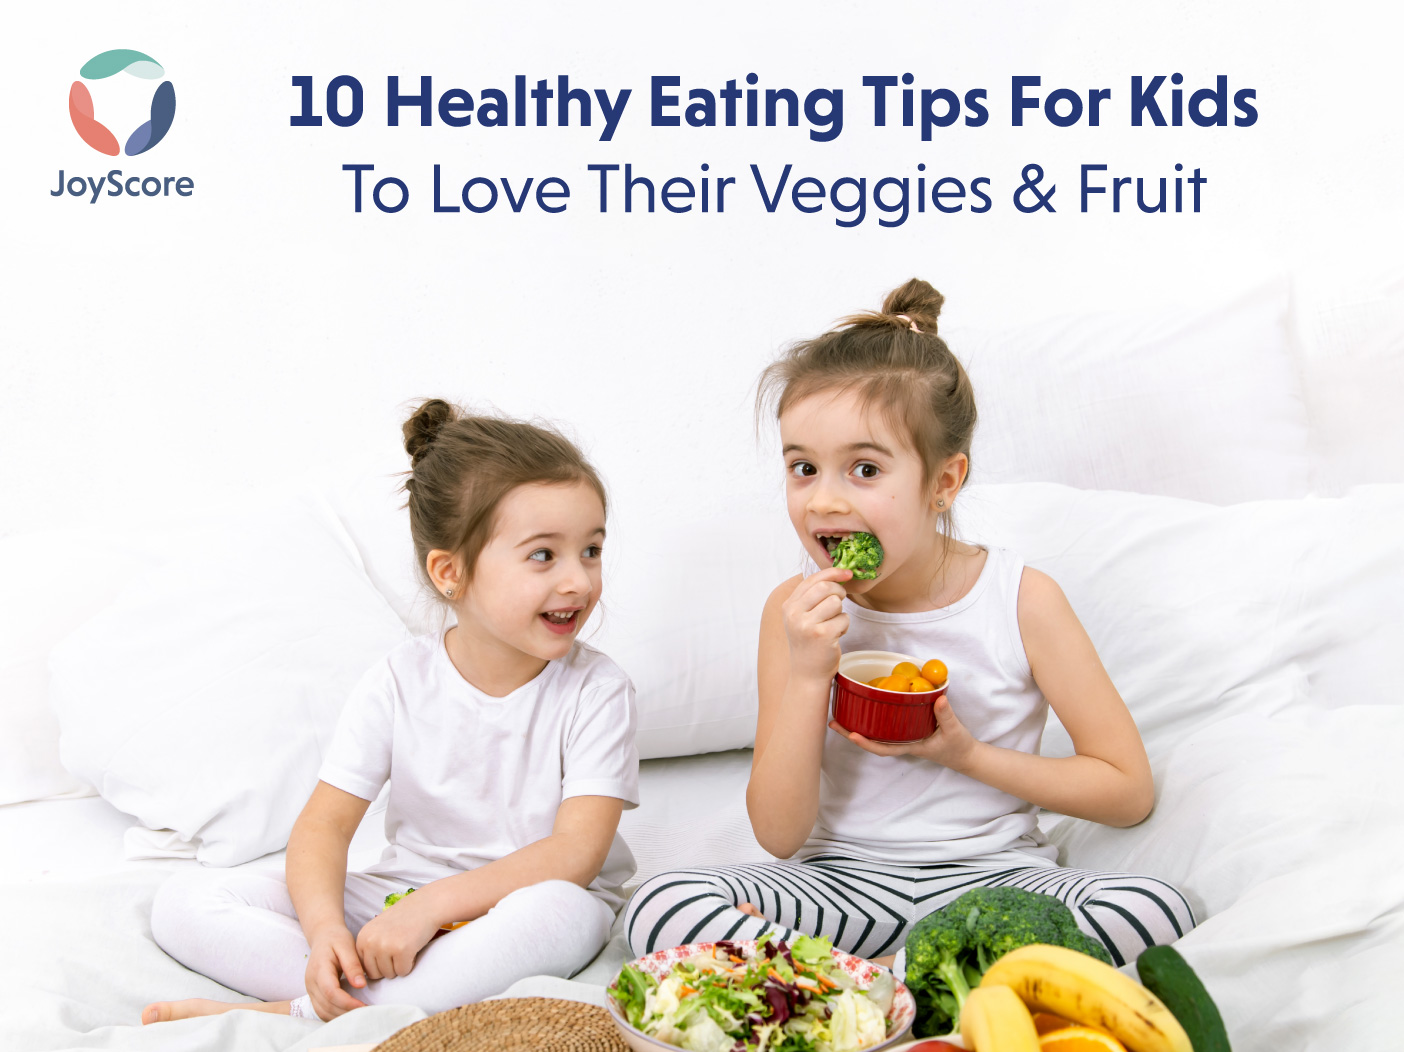 10 Healthy Eating Tips For Your Kids To Love Their Veggies And Fruit